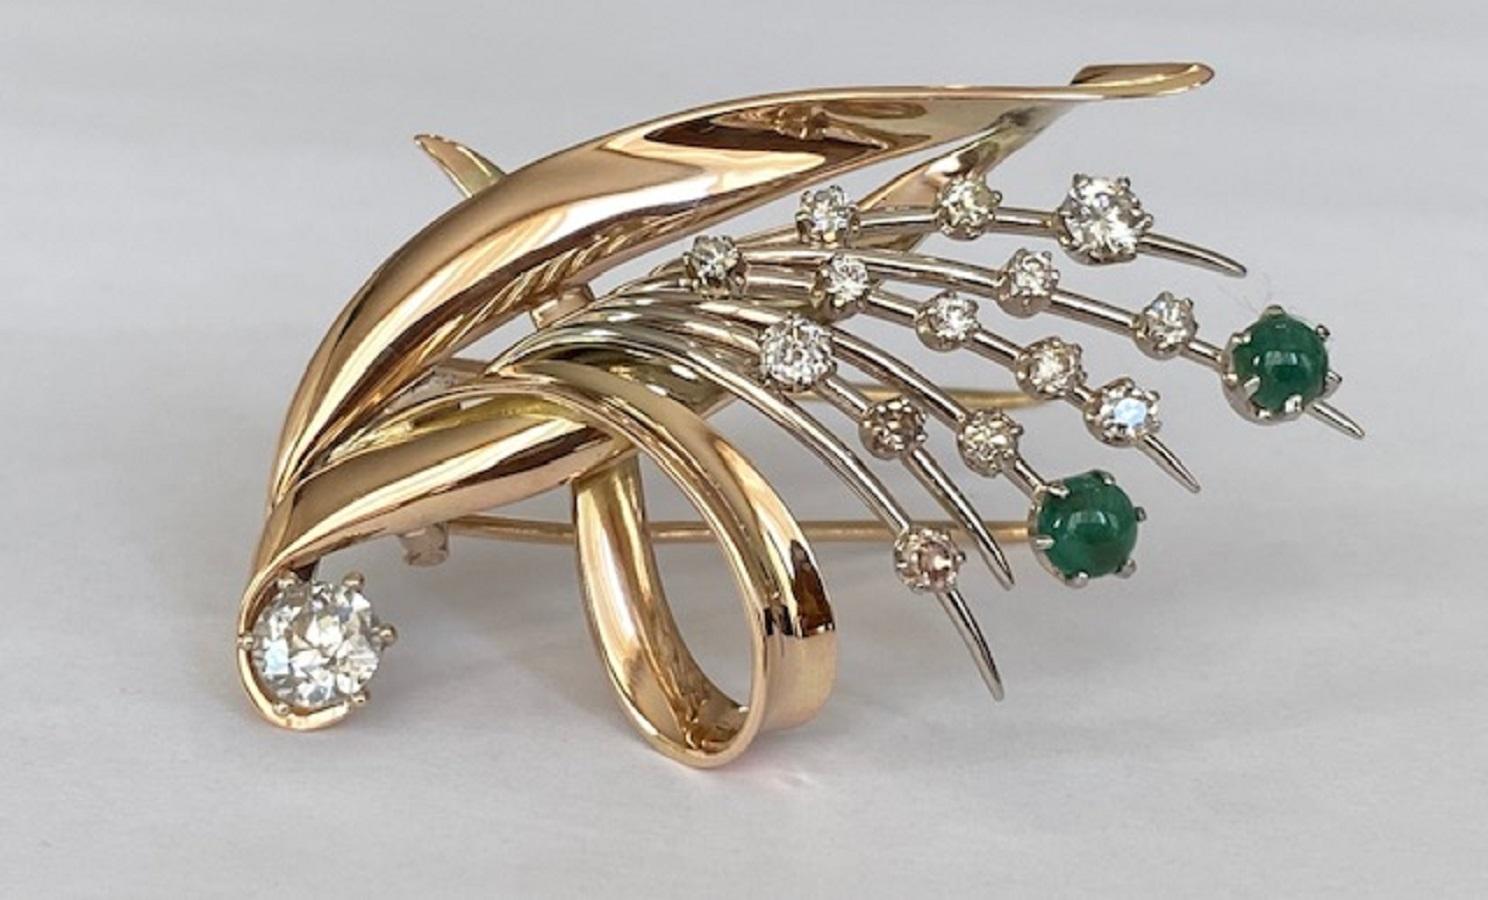 The Retro  brooch is made of 14 kt yellow gold and set with 14 Bolshevik cut diamonds in total approx. 0.65 ct H/SI/P, and one  Bolshevik cut diamond approx. 0.44 ct H/P1 and two cabochon cut emeralds approx. 0.50 ct. total. 
Grade: hallmarked